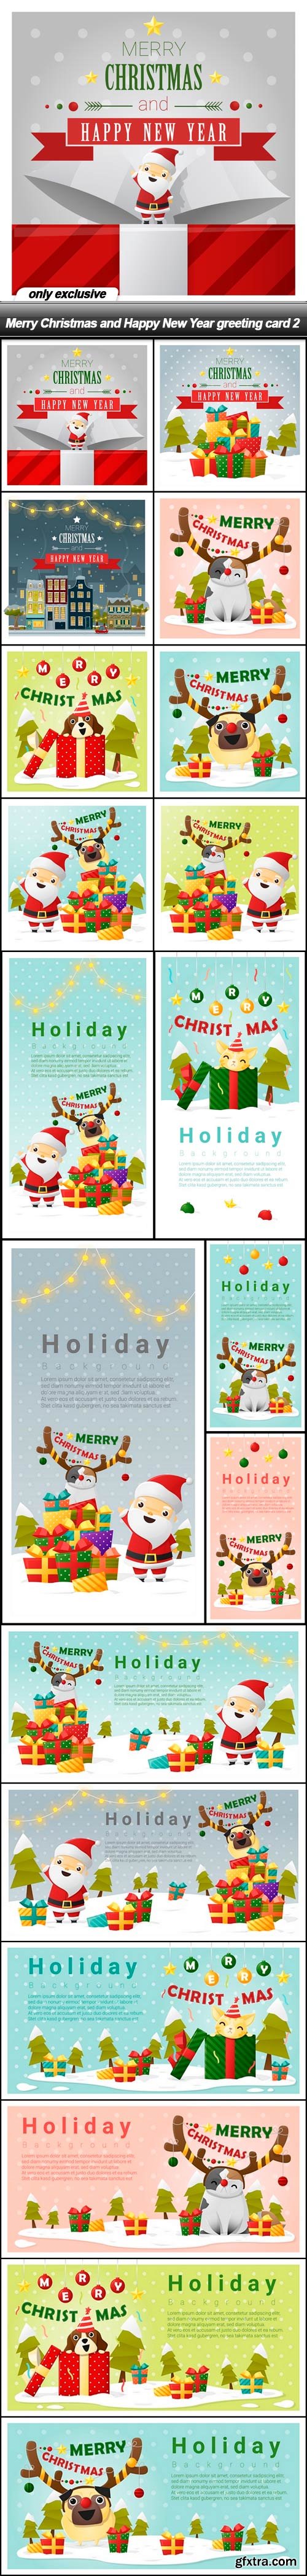 Merry Christmas and Happy New Year greeting card 2 - 20 EPS